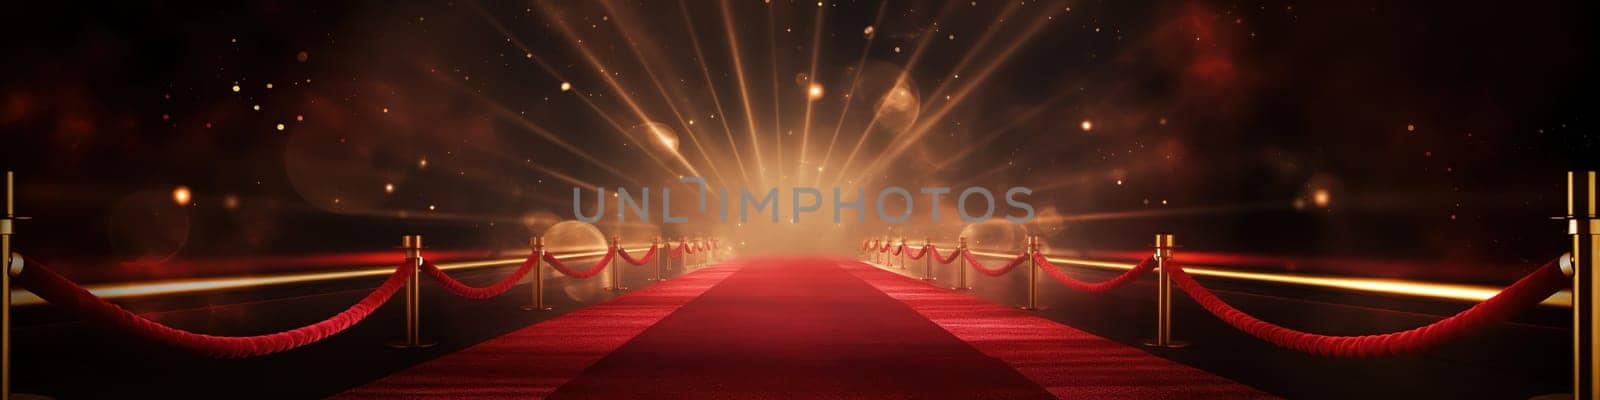 Red carpet with a flares and glowing effects in the end as banner